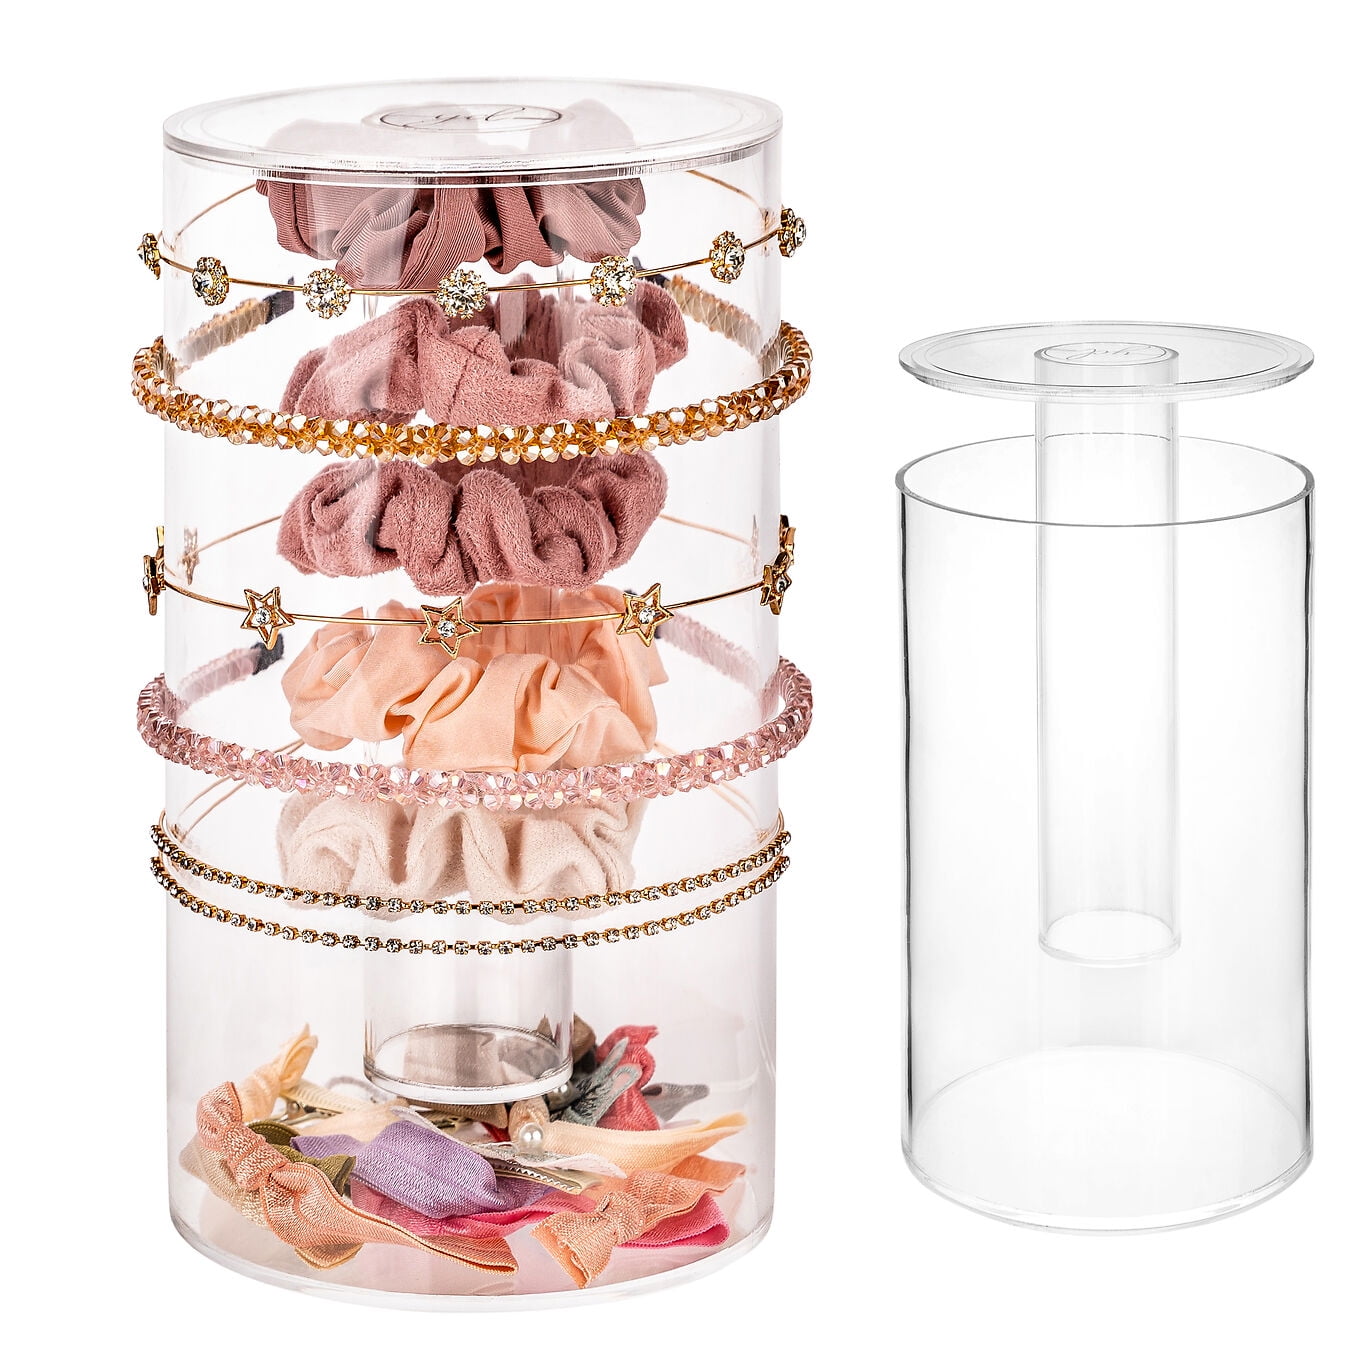 Frog Sac Jewelry Organizer, Clear Acrylic Bracelet and Necklace Holder, Headband Storage Organization, Hair Scrunchie Stand for Room, Wall Mounted